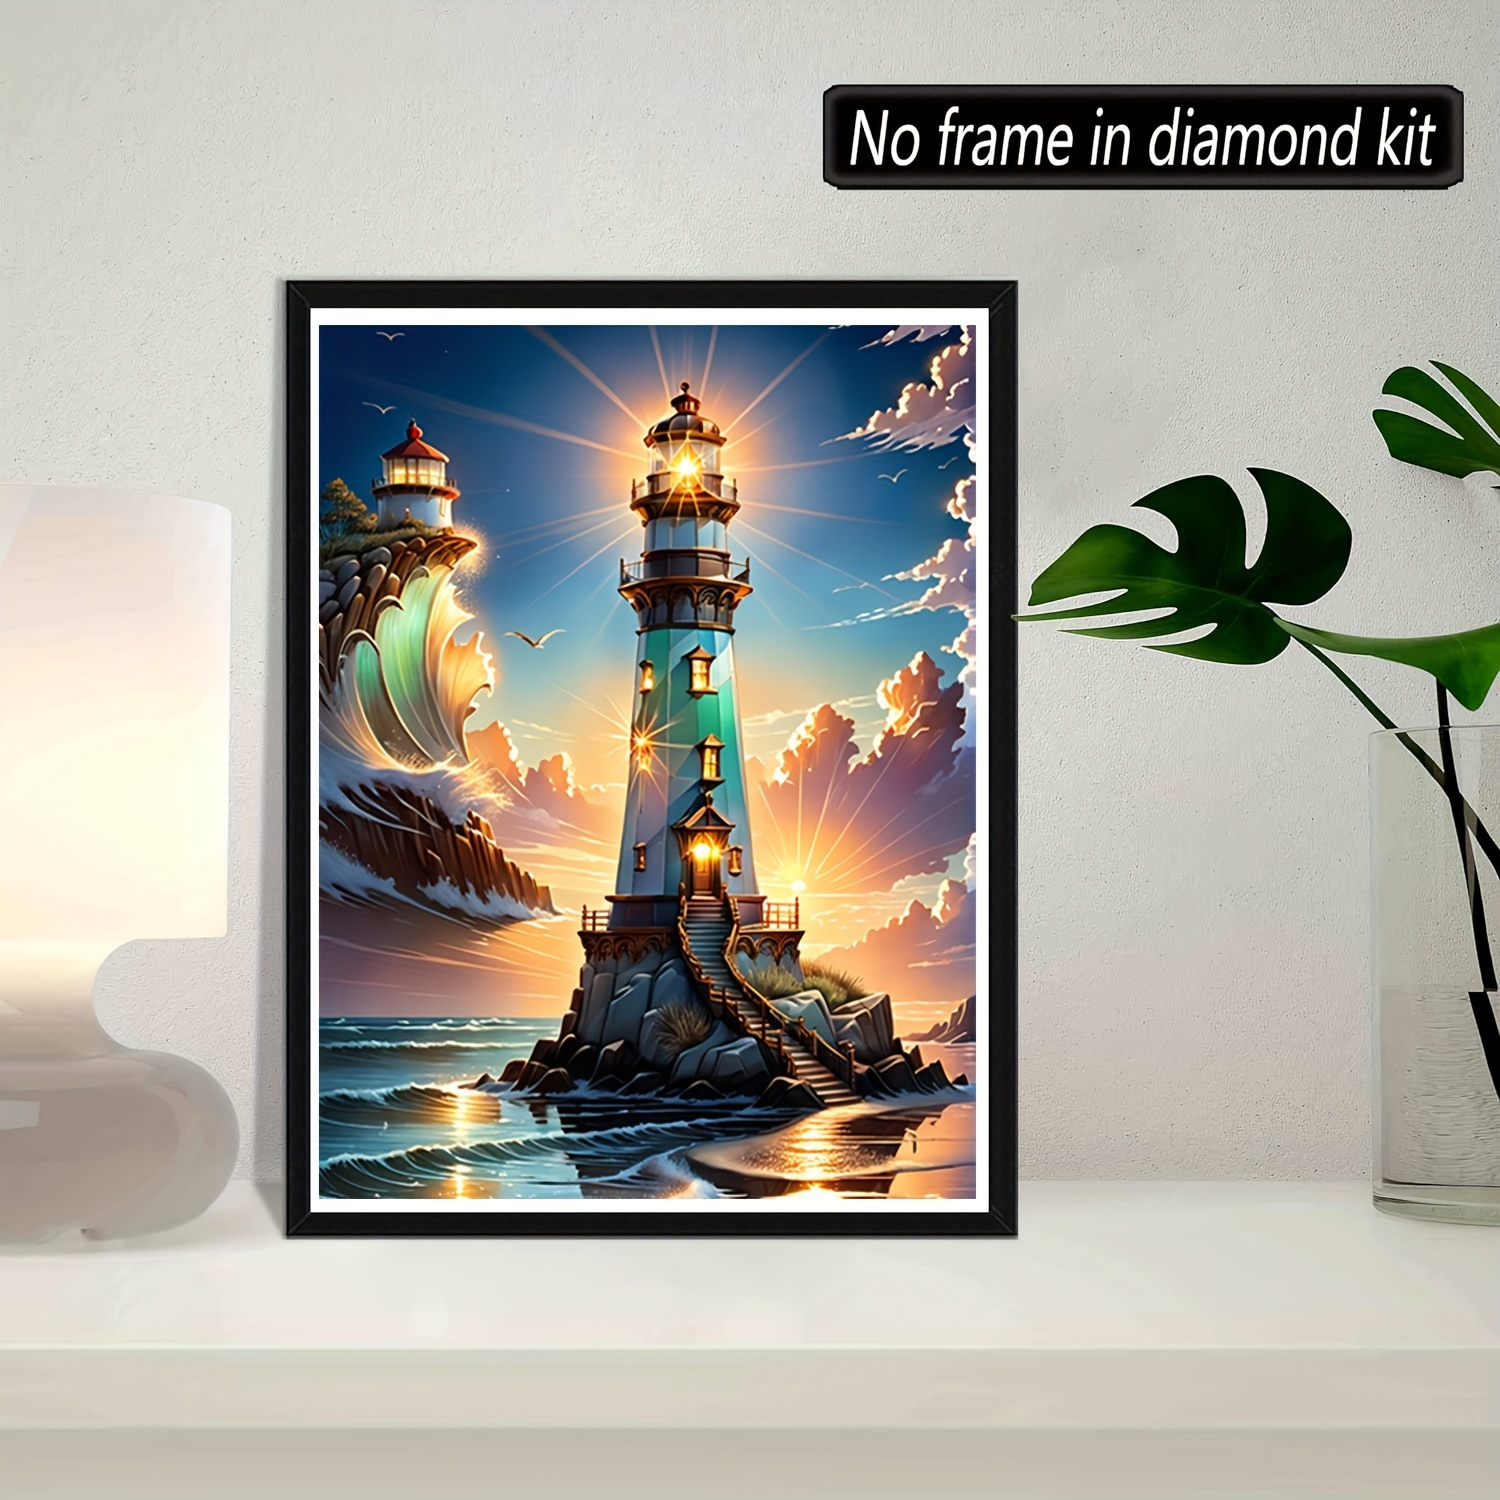 

Lighthouse Waterfront Diamond Art Painting Kit, 5d Diamond Painting Kit For Beginners, Diy Painting Pictures With Full Diamond Diamond Dots For Home Wall Art Deco. Frameless (30x40cm/11.8x15.7inch)